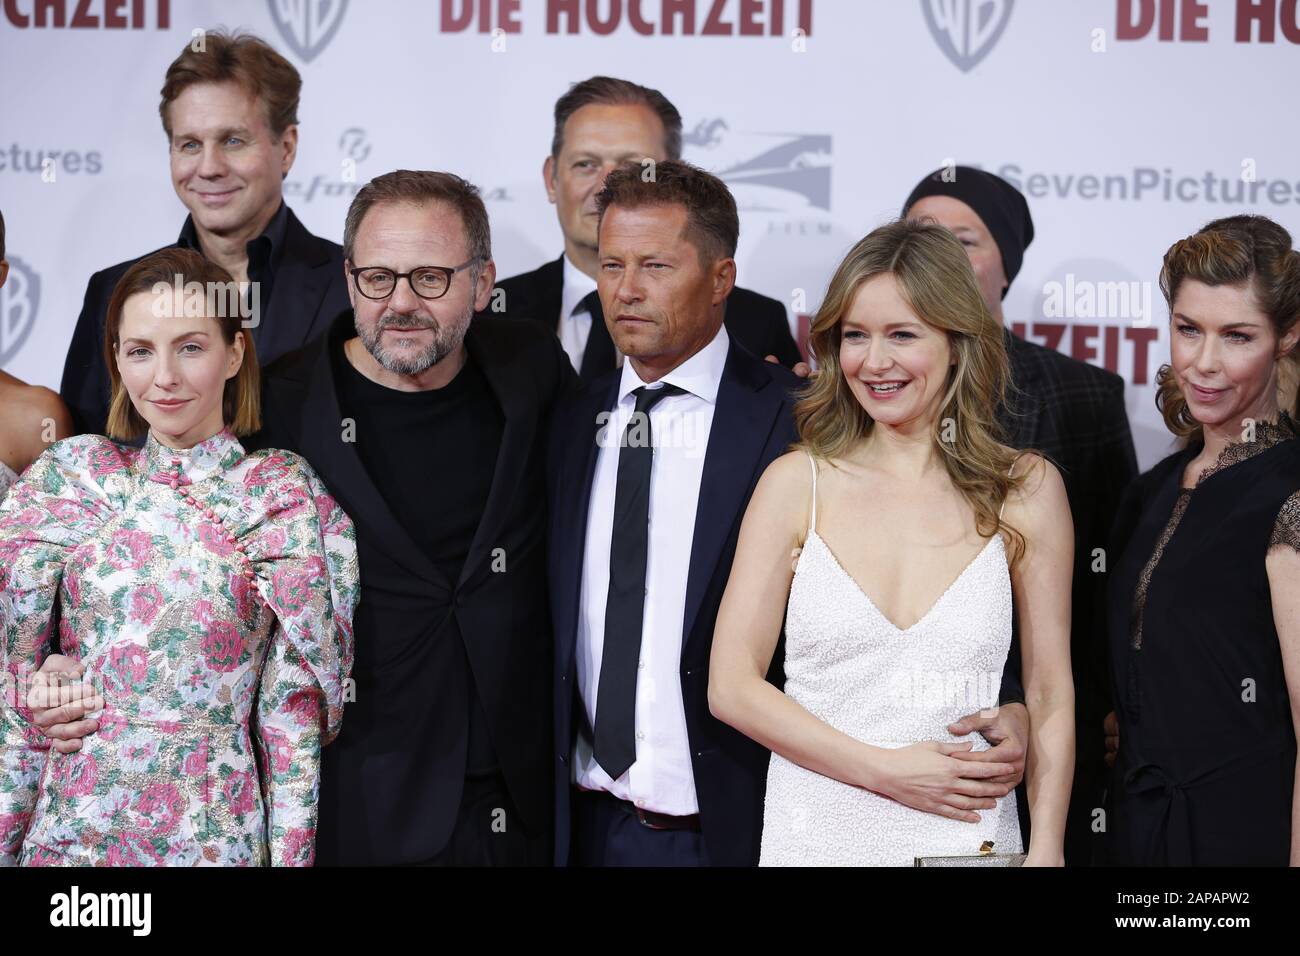 Berlin, Germany. 21st Jan, 2020. Berlin:The photo shows actors Katharina Schüttler, Samuel Finzi, Til Schweiger, Stefanie Stappenbeck, Brigitte Zeh on the red carpet in front of the Zoo Palace. (Photo by Simone Kuhlmey/Pacific Press) Credit: Pacific Press Agency/Alamy Live News Stock Photo